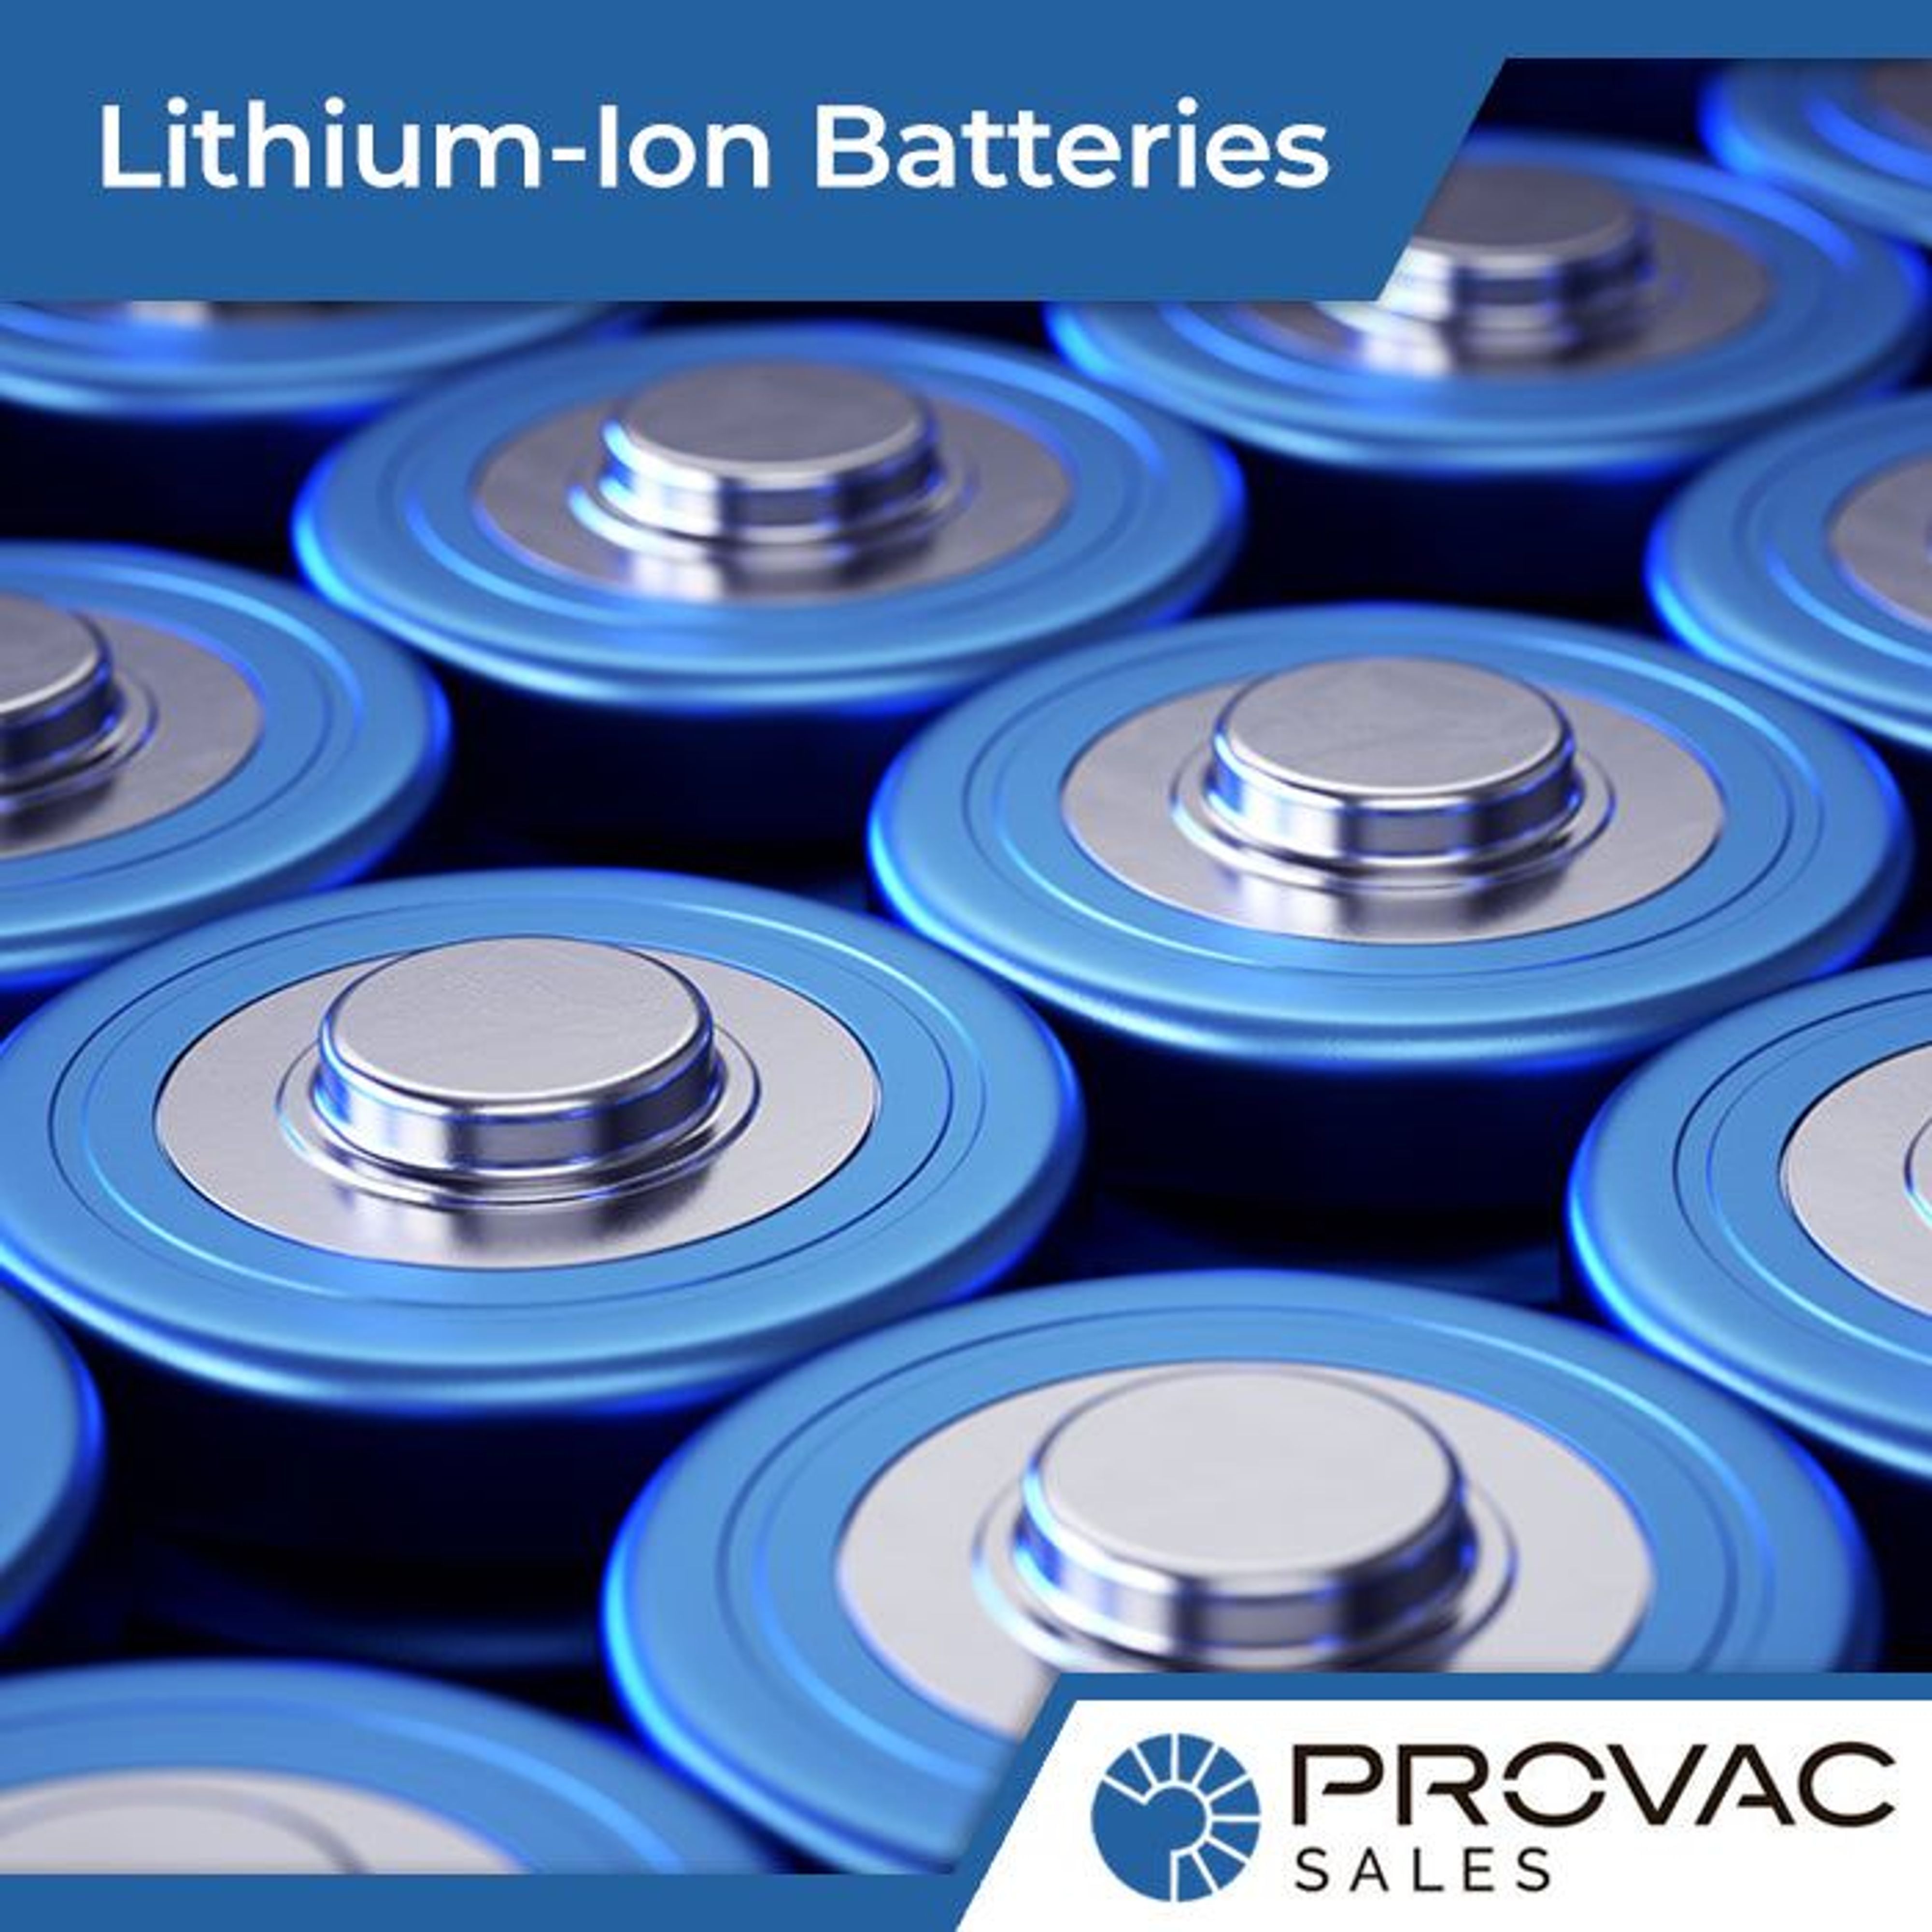 The Use of Vacuum for Manufacturing Lithium-Ion Batteries Background